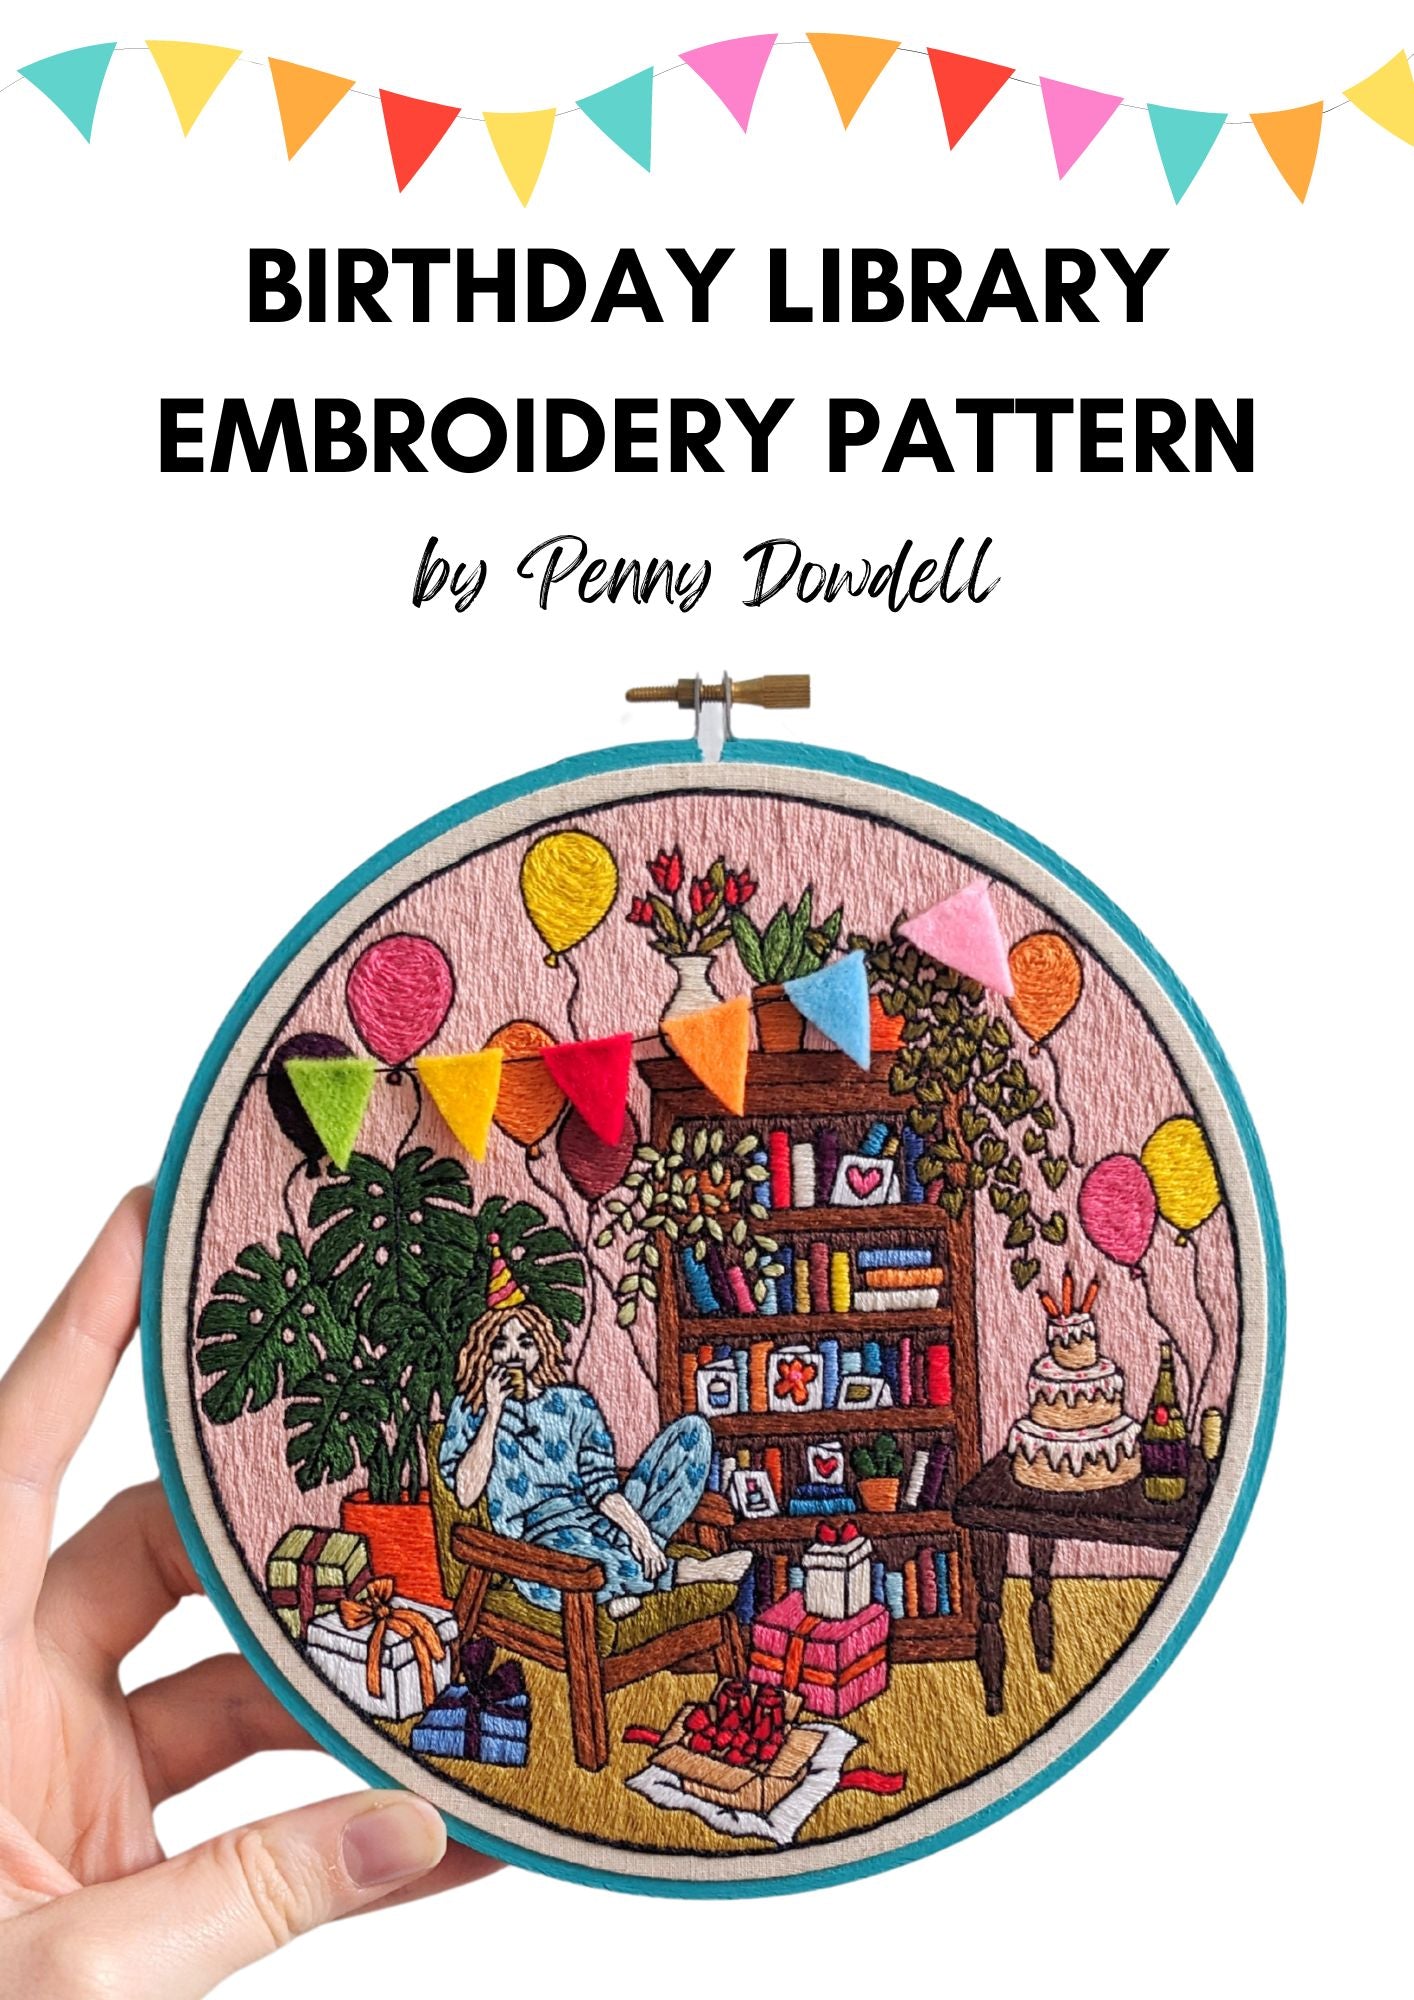 Birthday Library Embroidery PDF PATTERN DOWNLOAD